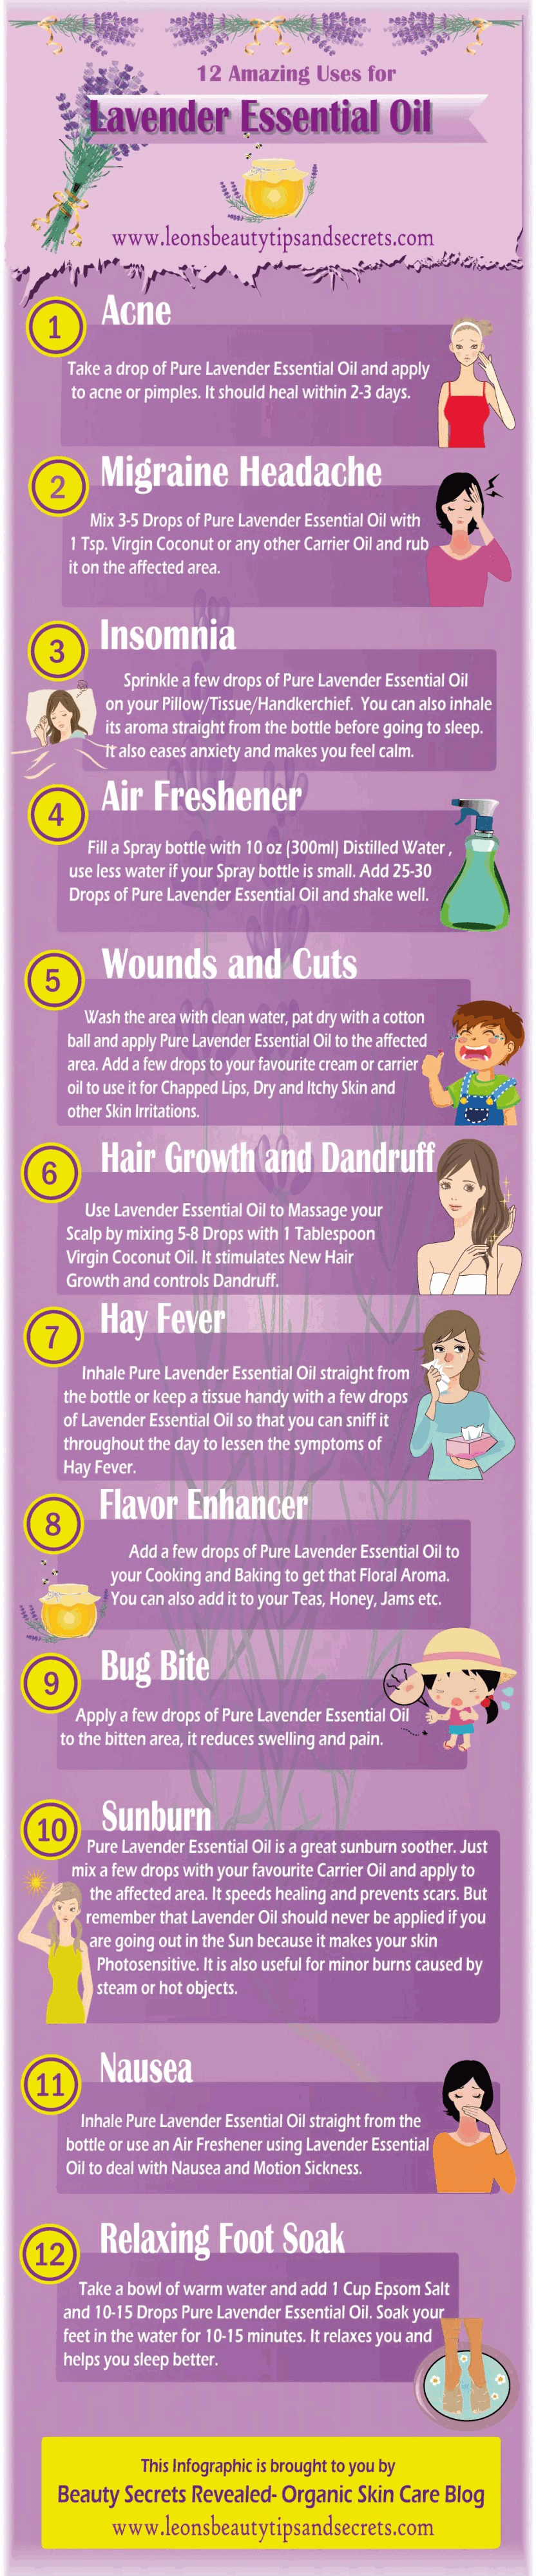 12 Amazing Uses For Lavender Essential Oil